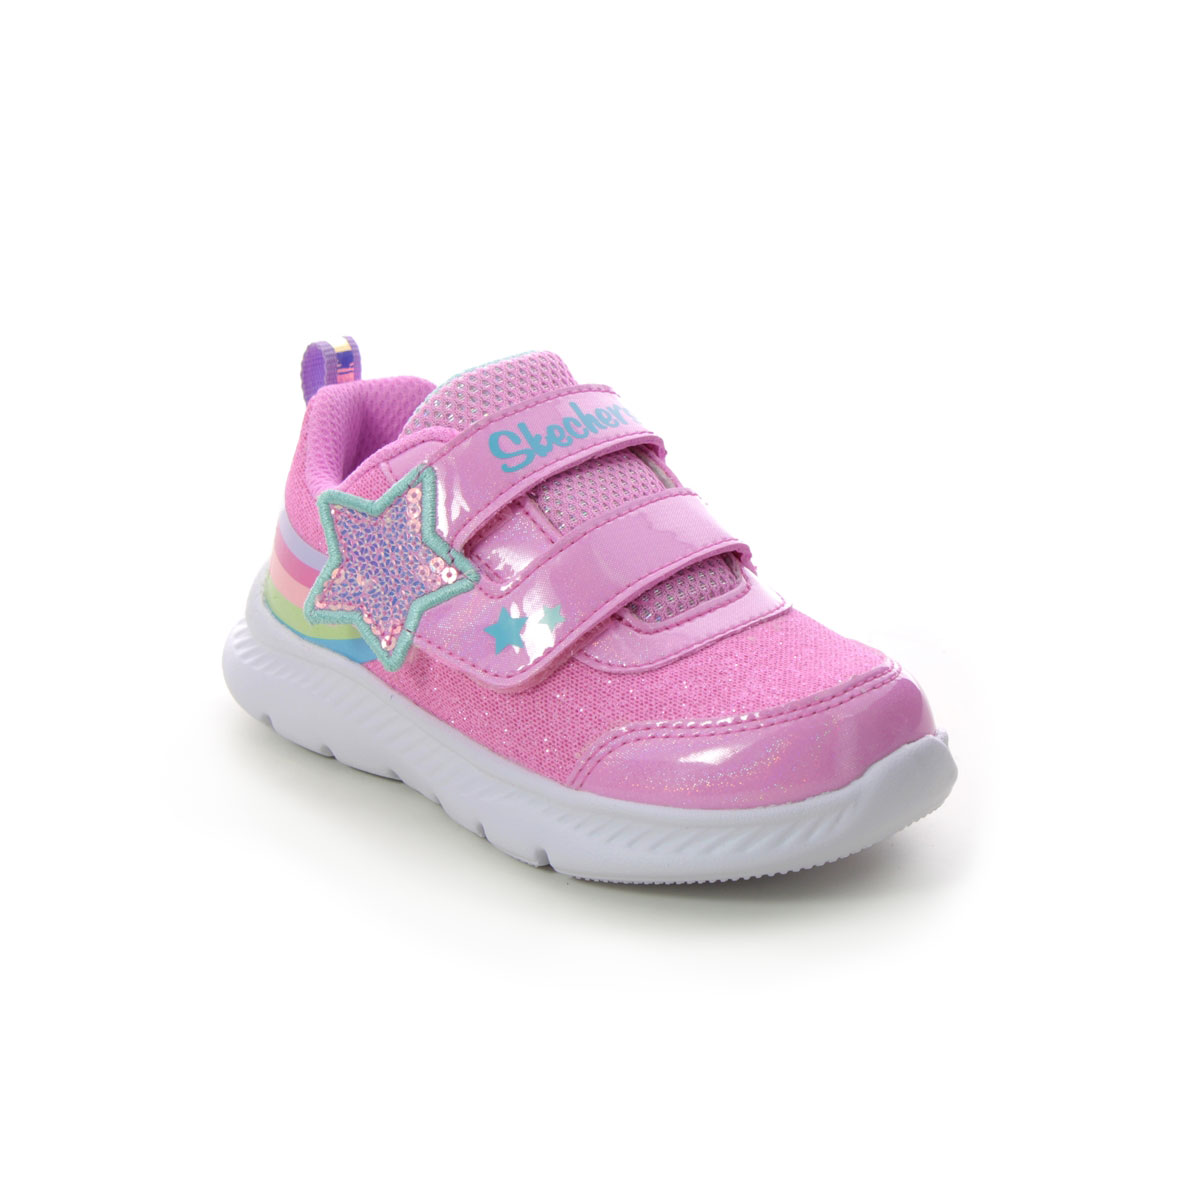 Skechers Comfy Flex Velcro Pink Kids Girls Trainers 302711N In Size 24 In Plain Pink For kids